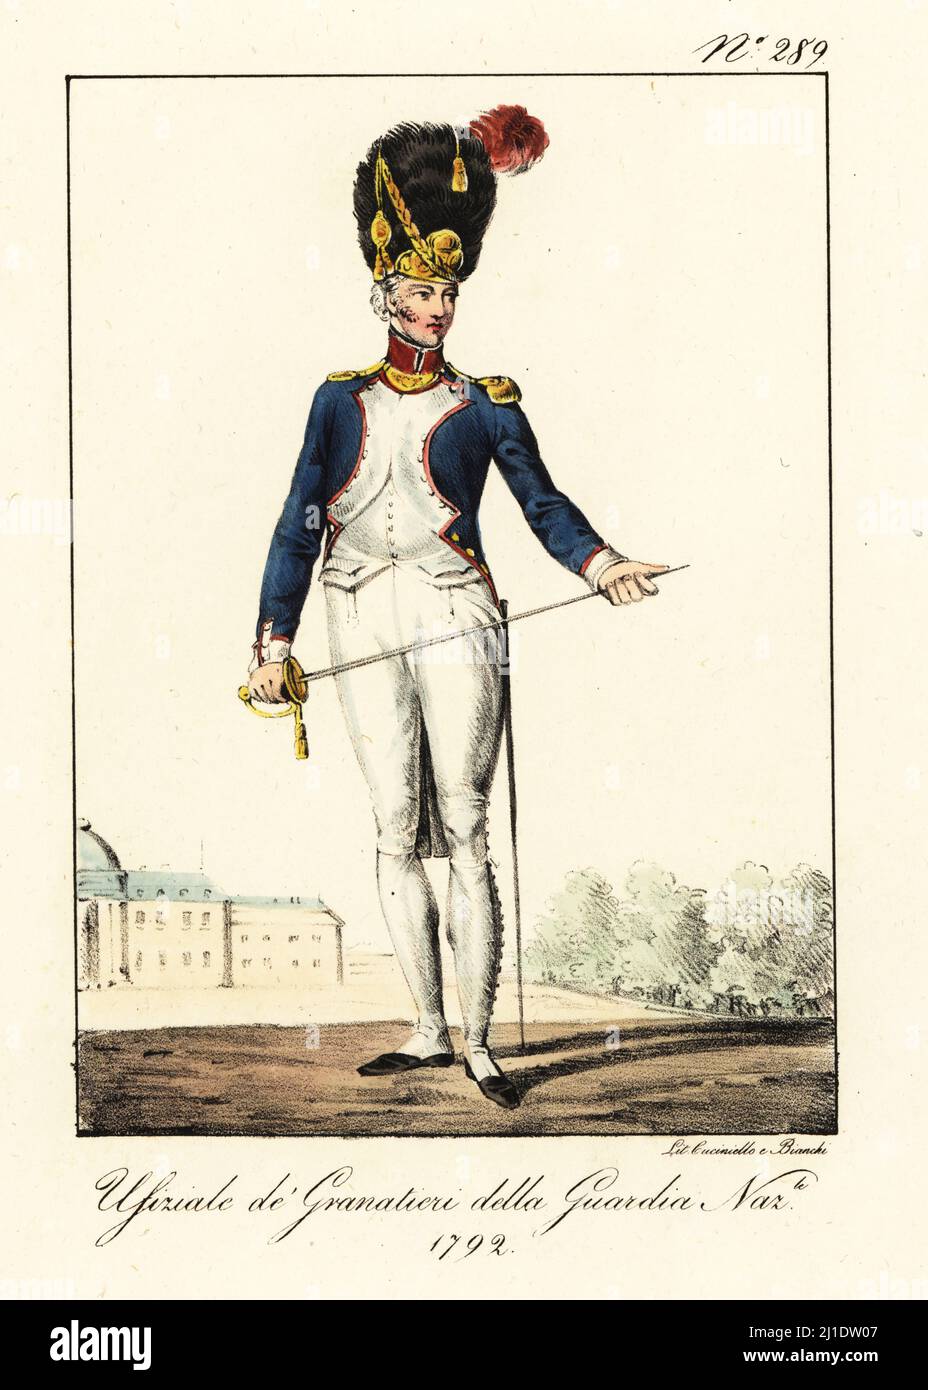 Uniform of an officer in the Grenadiers of the National Guard, 1792. In plumed bearskin helmet, blue jacket with gold epaulettes and gorgette, white breeches, gaiters, gold-hilt sword. The regiment was founded during the French Revolution in 1789. Officier de Grenadiers de la Garde Nationale. Handcoloured lithograph by Lorenzo Bianchi and Domenico Cuciniello after Hippolyte Lecomte from Costumi civili e militari della monarchia francese dal 1200 al 1820, Naples, 1825. Italian edition of Lecomte’s Civilian and military costumes of the French monarchy from 1200 to 1820. Stock Photo